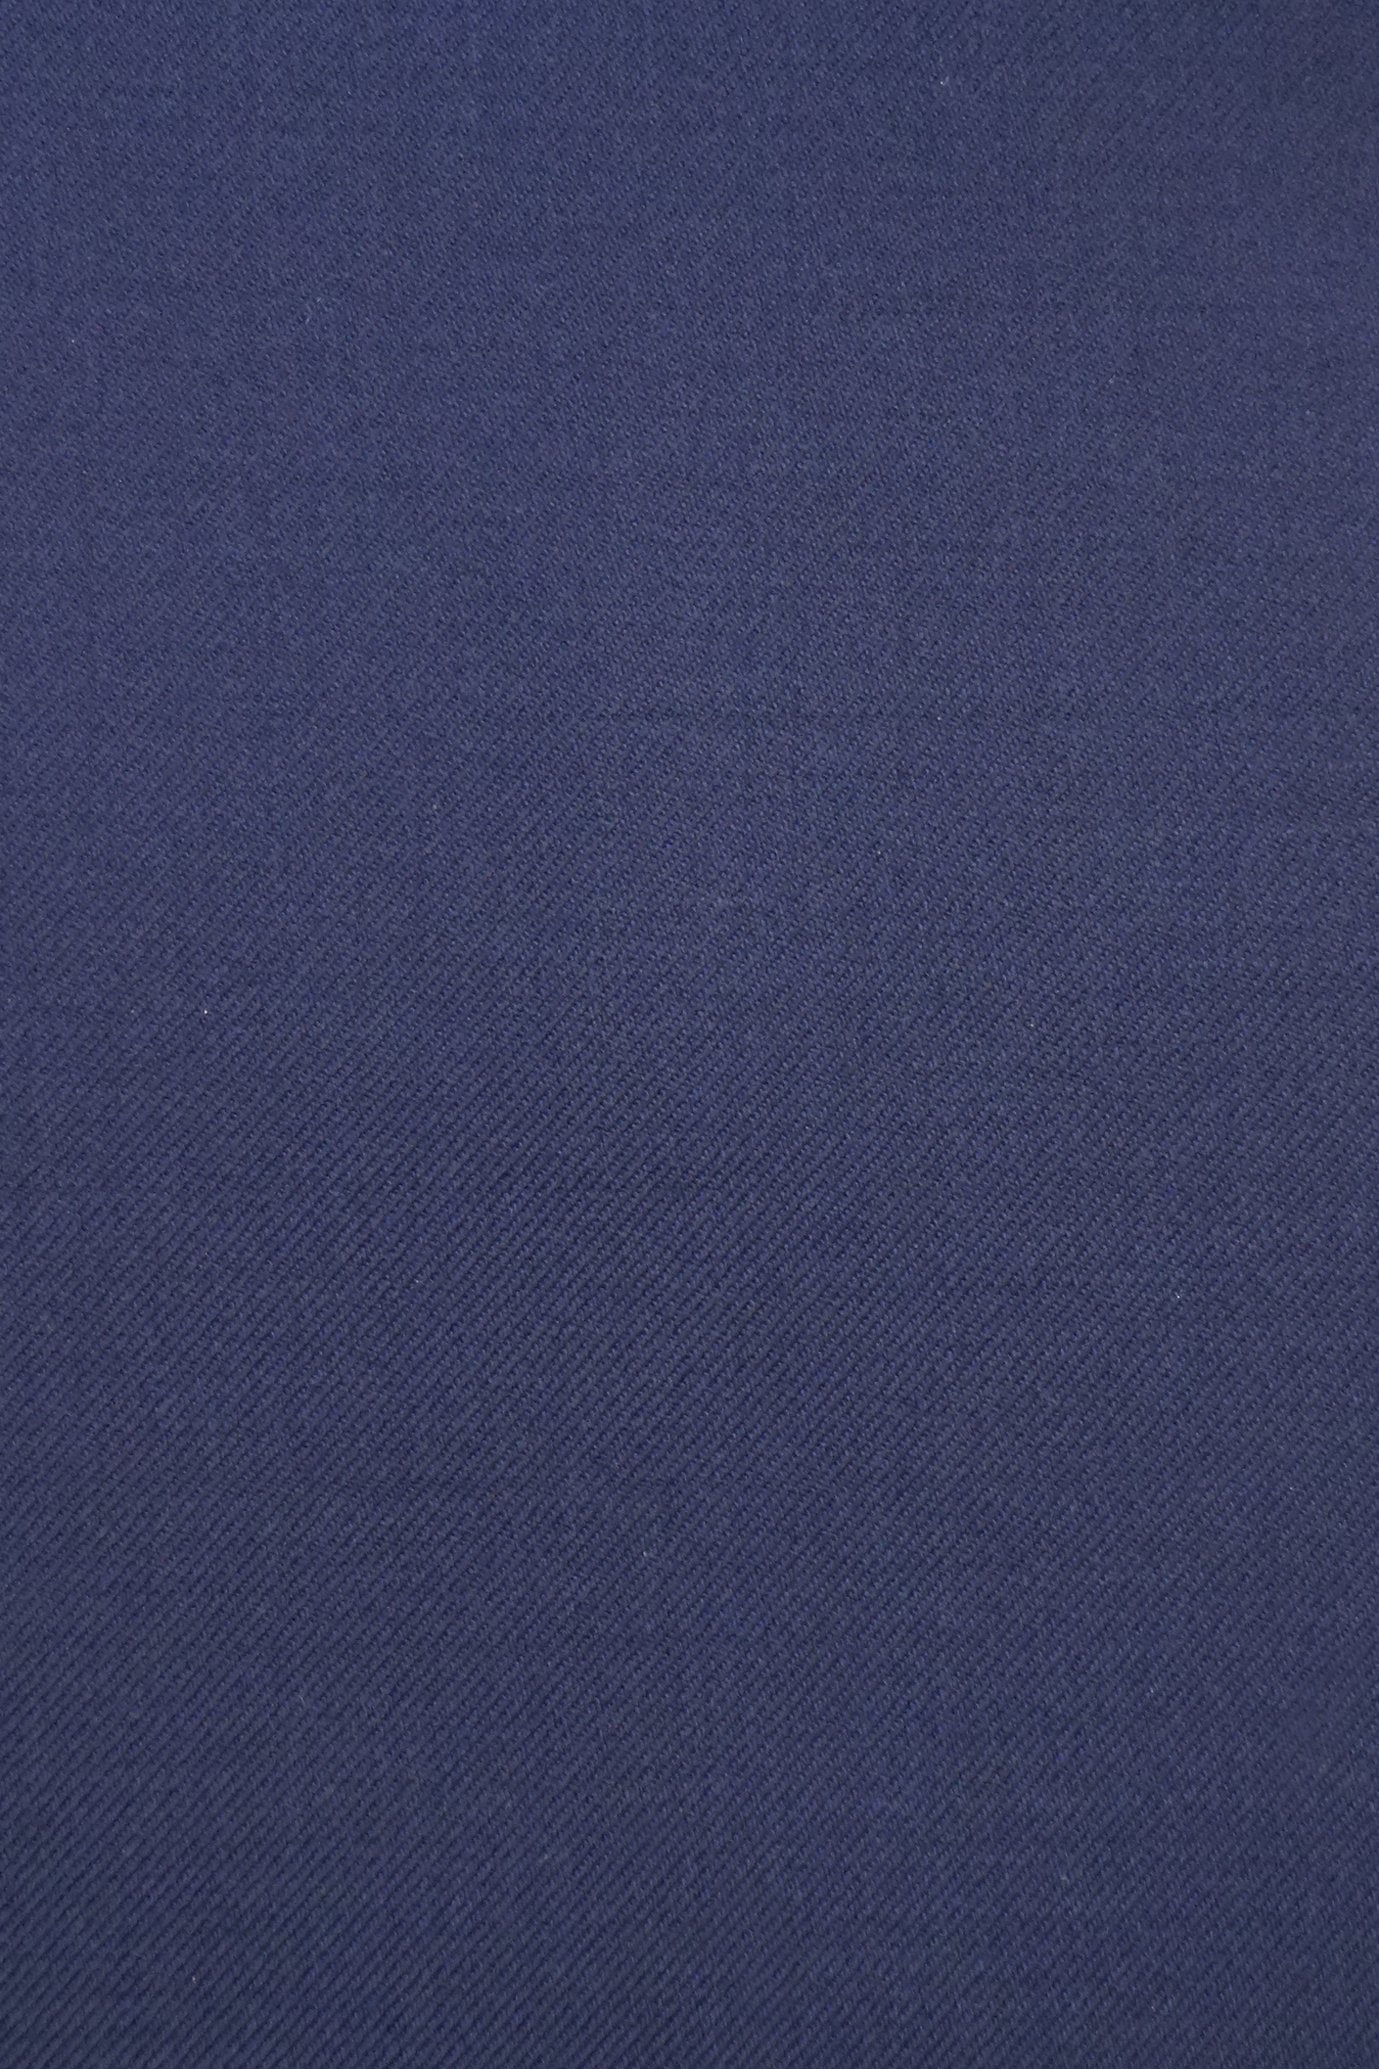 
                  
                    Luxury navy blue wool suit fabric swatch made in Italy
                  
                